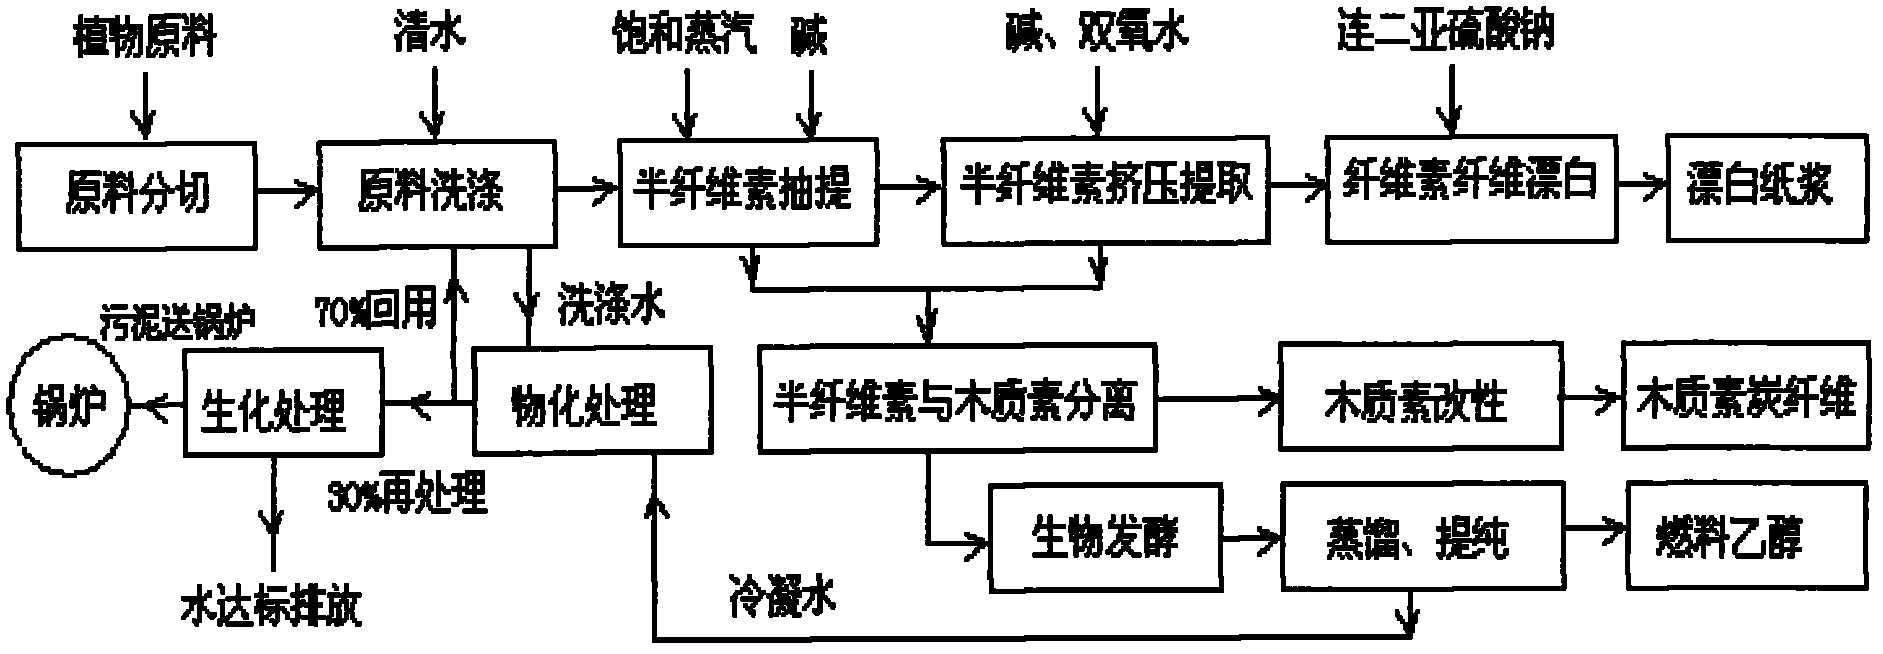 Preparation method for co-producing bleached paper pulp, lignin carbon fibers and fuel ethanol